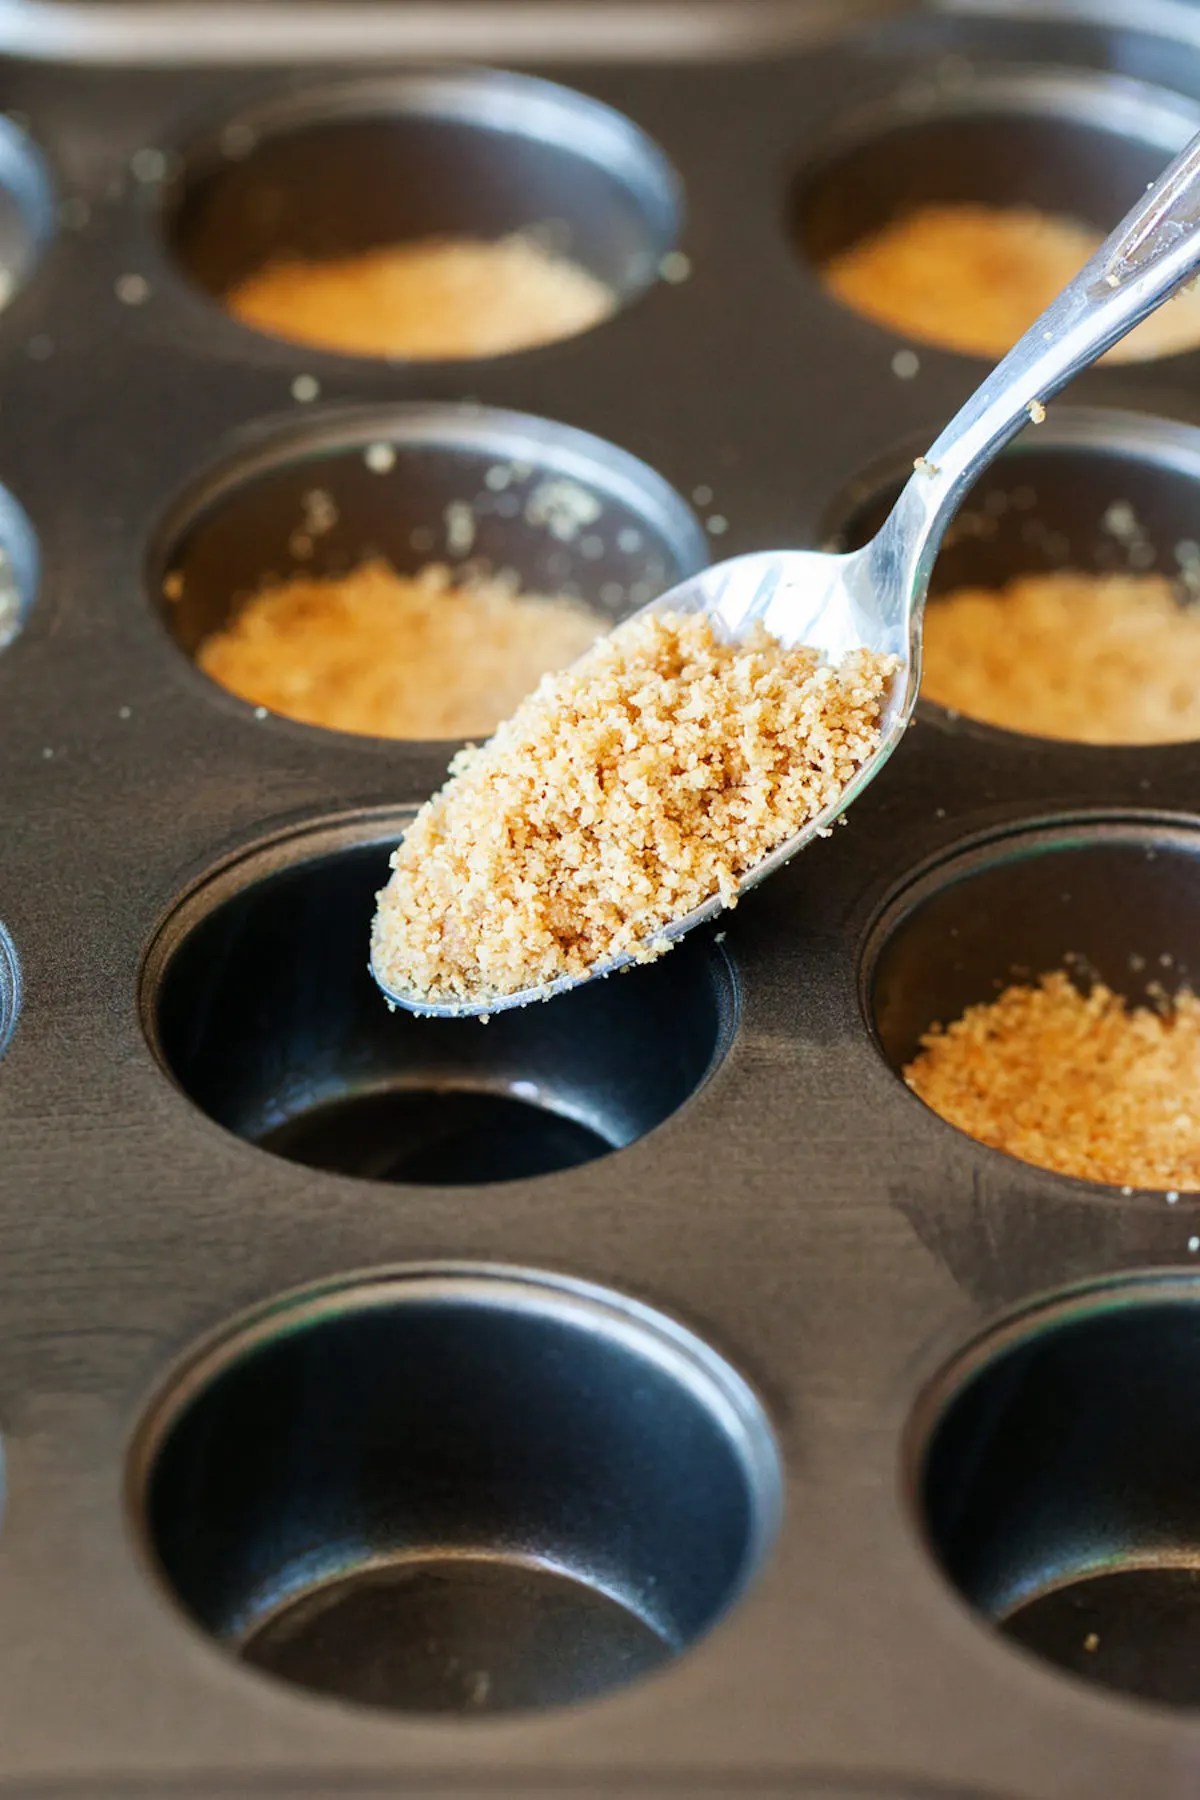 Pouring crushed up graham cracker crumbs into a muffin tin with a spoon